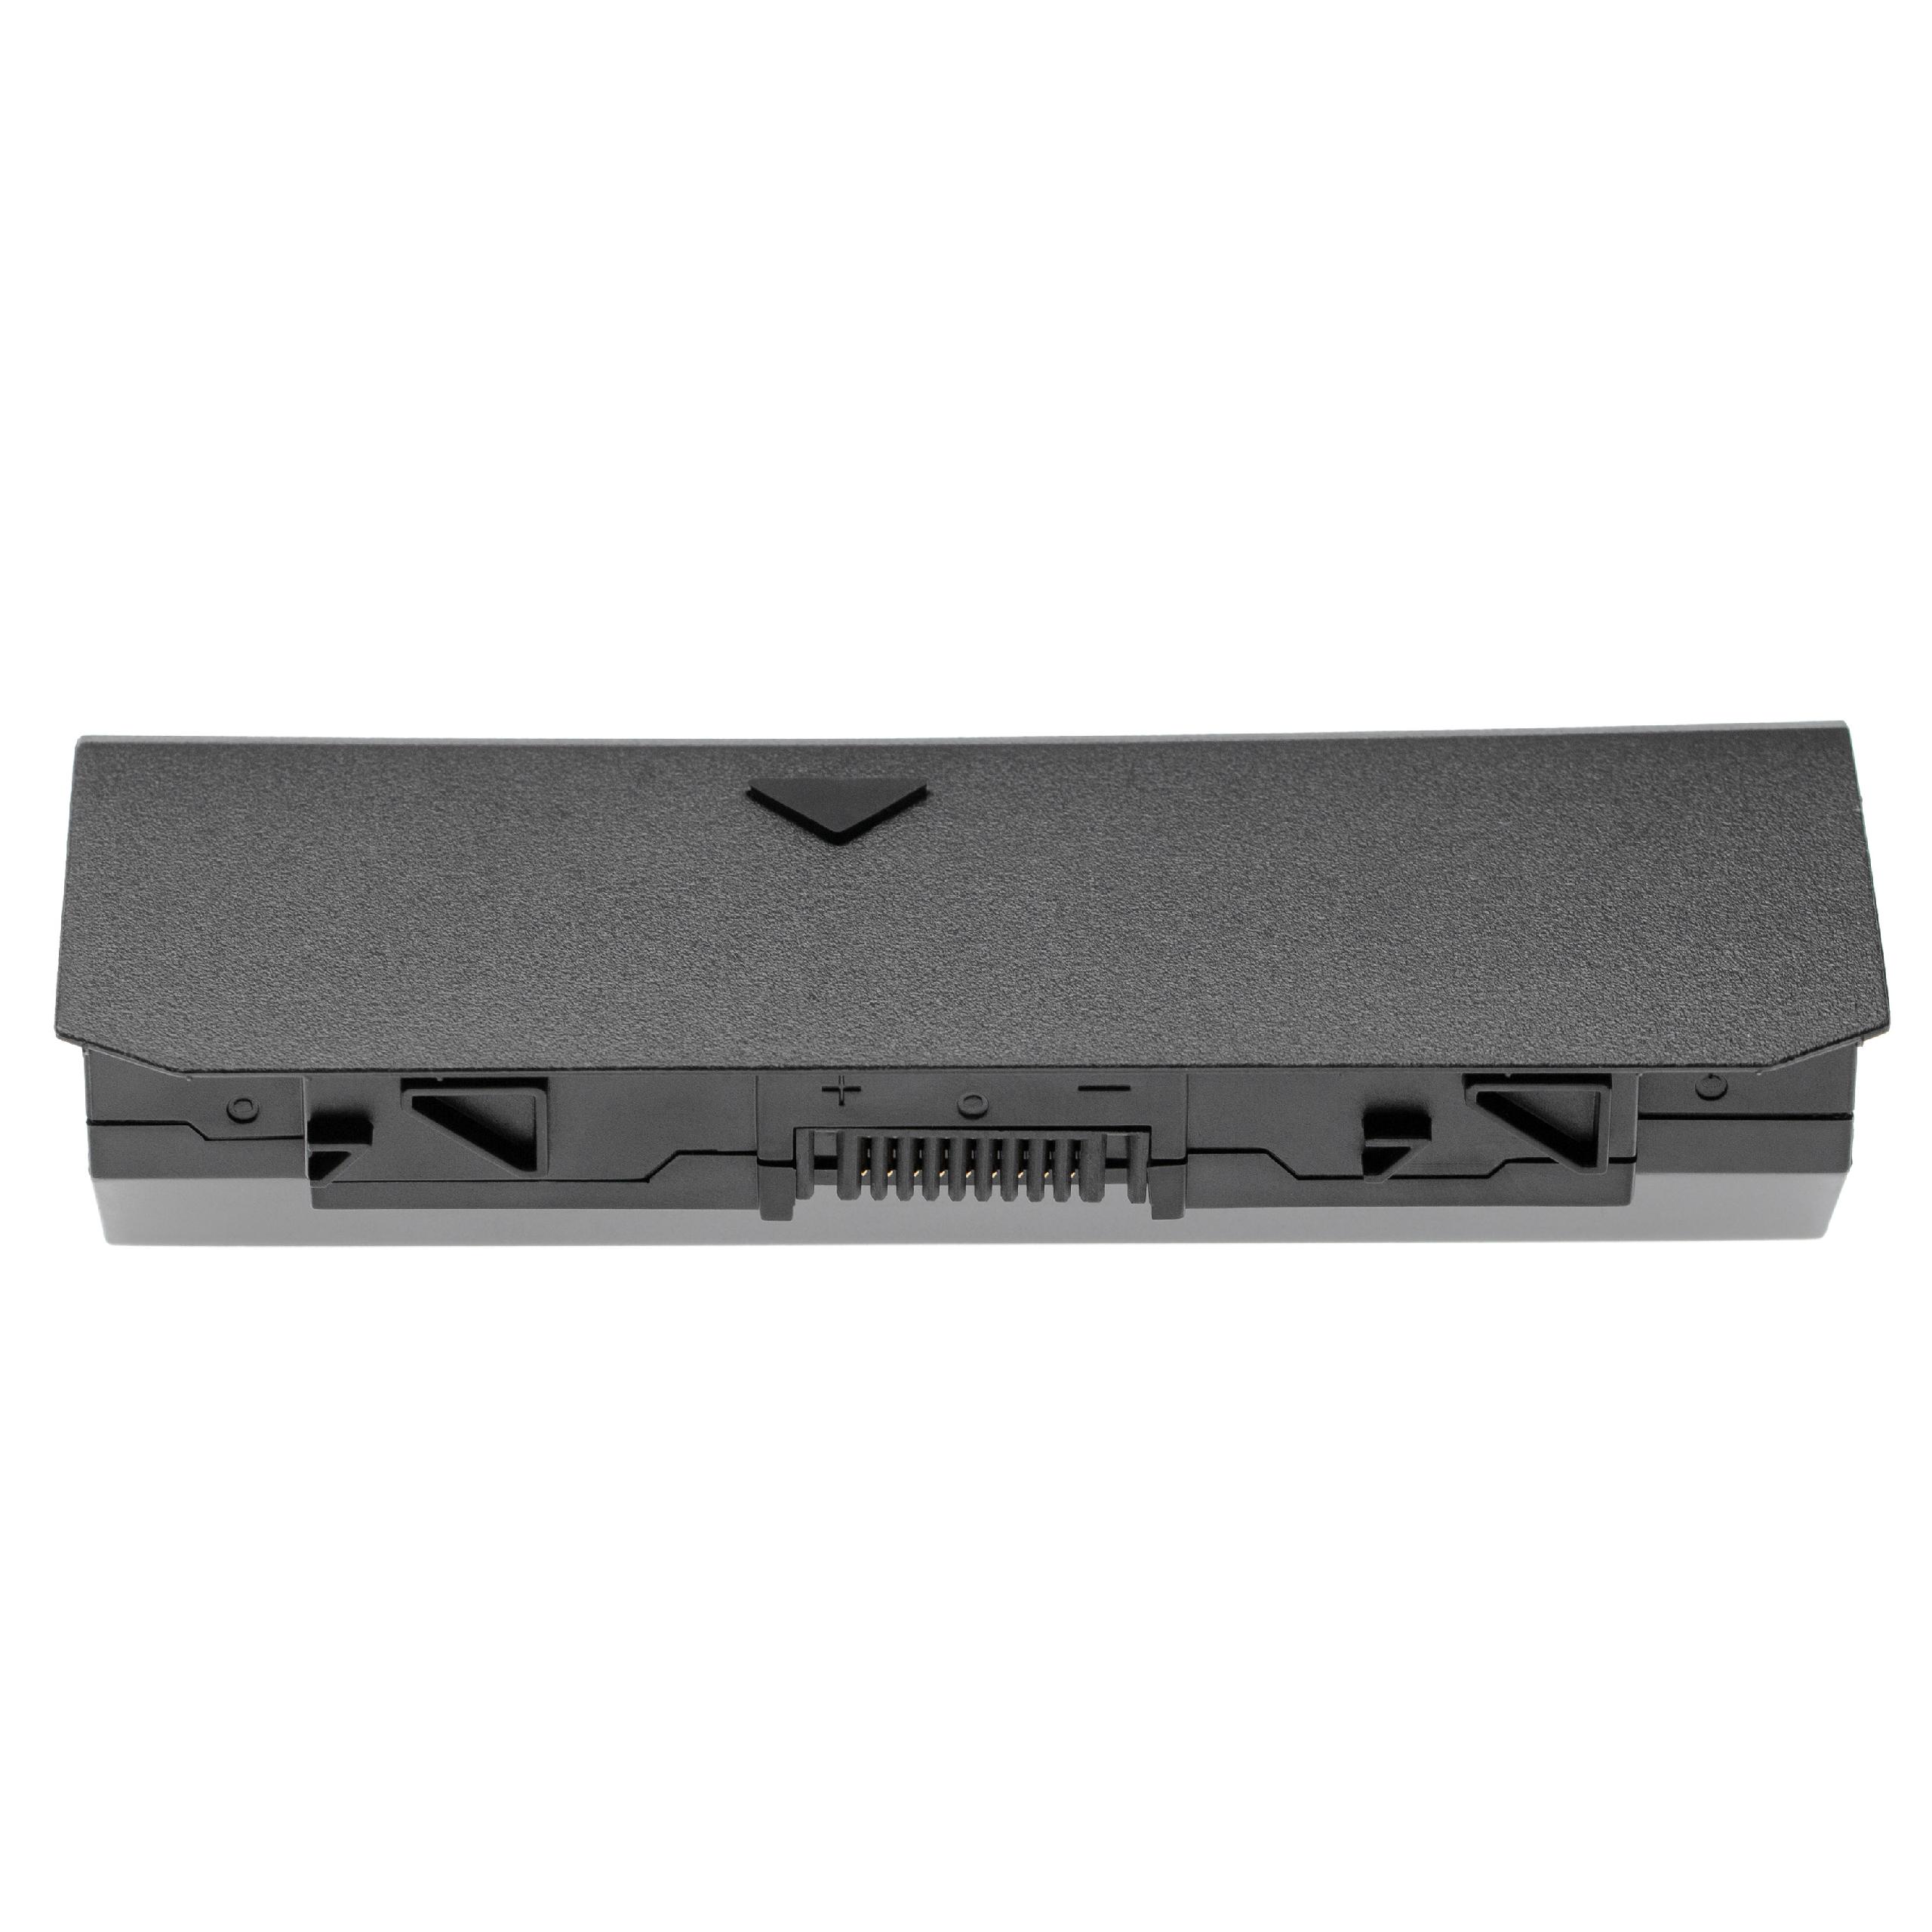 Notebook Battery Replacement for Asus A42-G750 - 5900mAh 15V Li-polymer, black